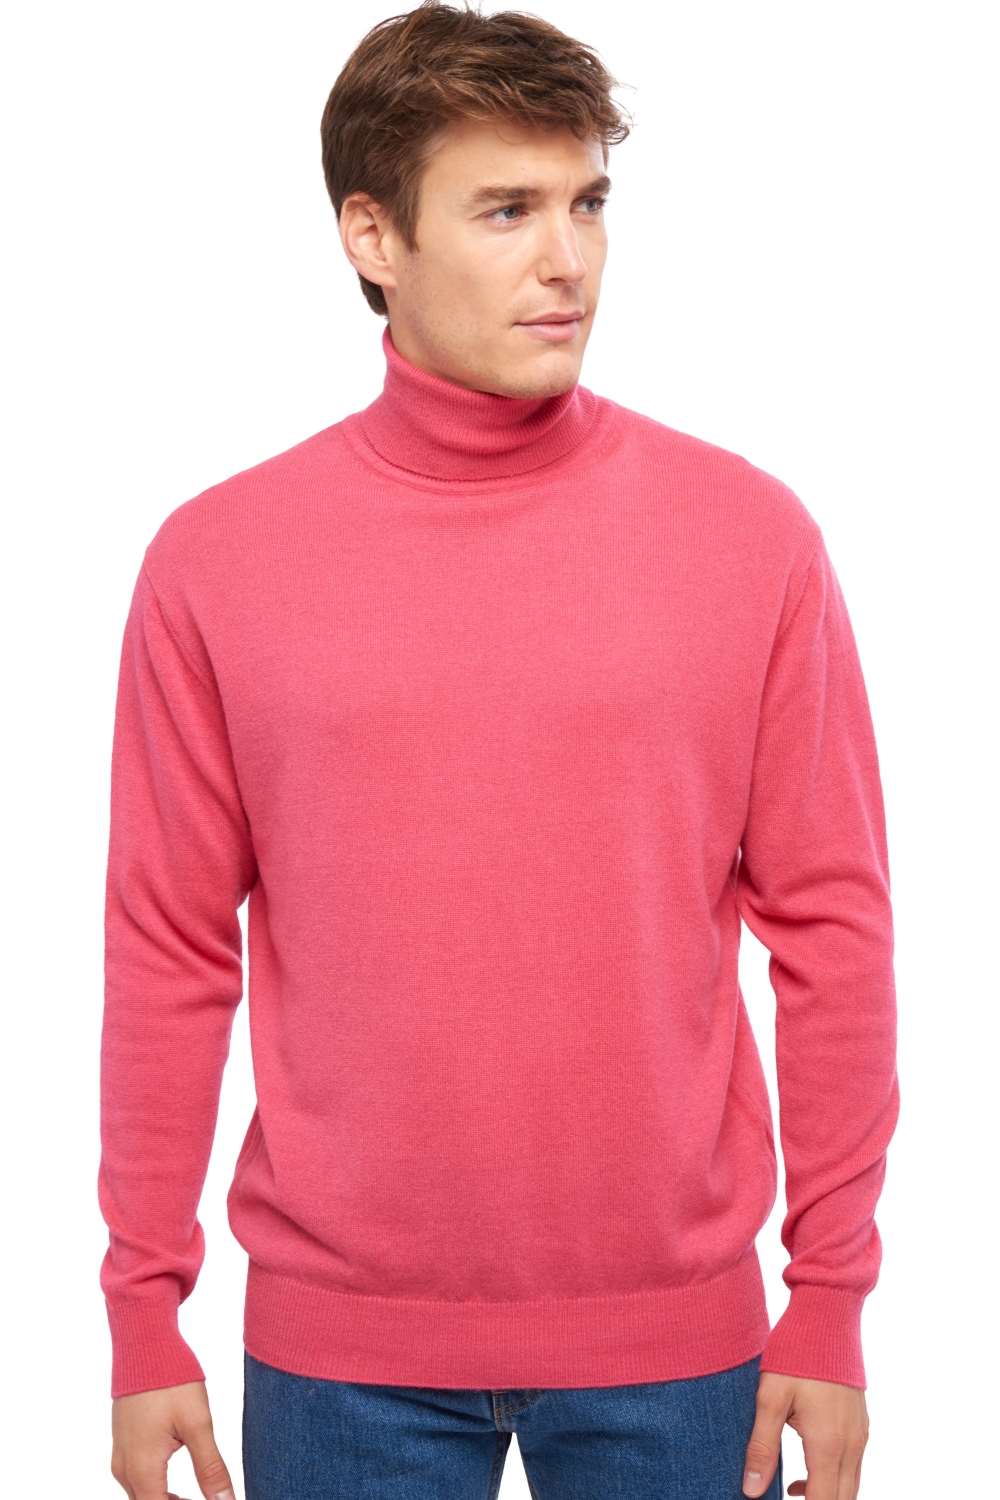 Cachemire pull homme col roule edgar rose shocking s